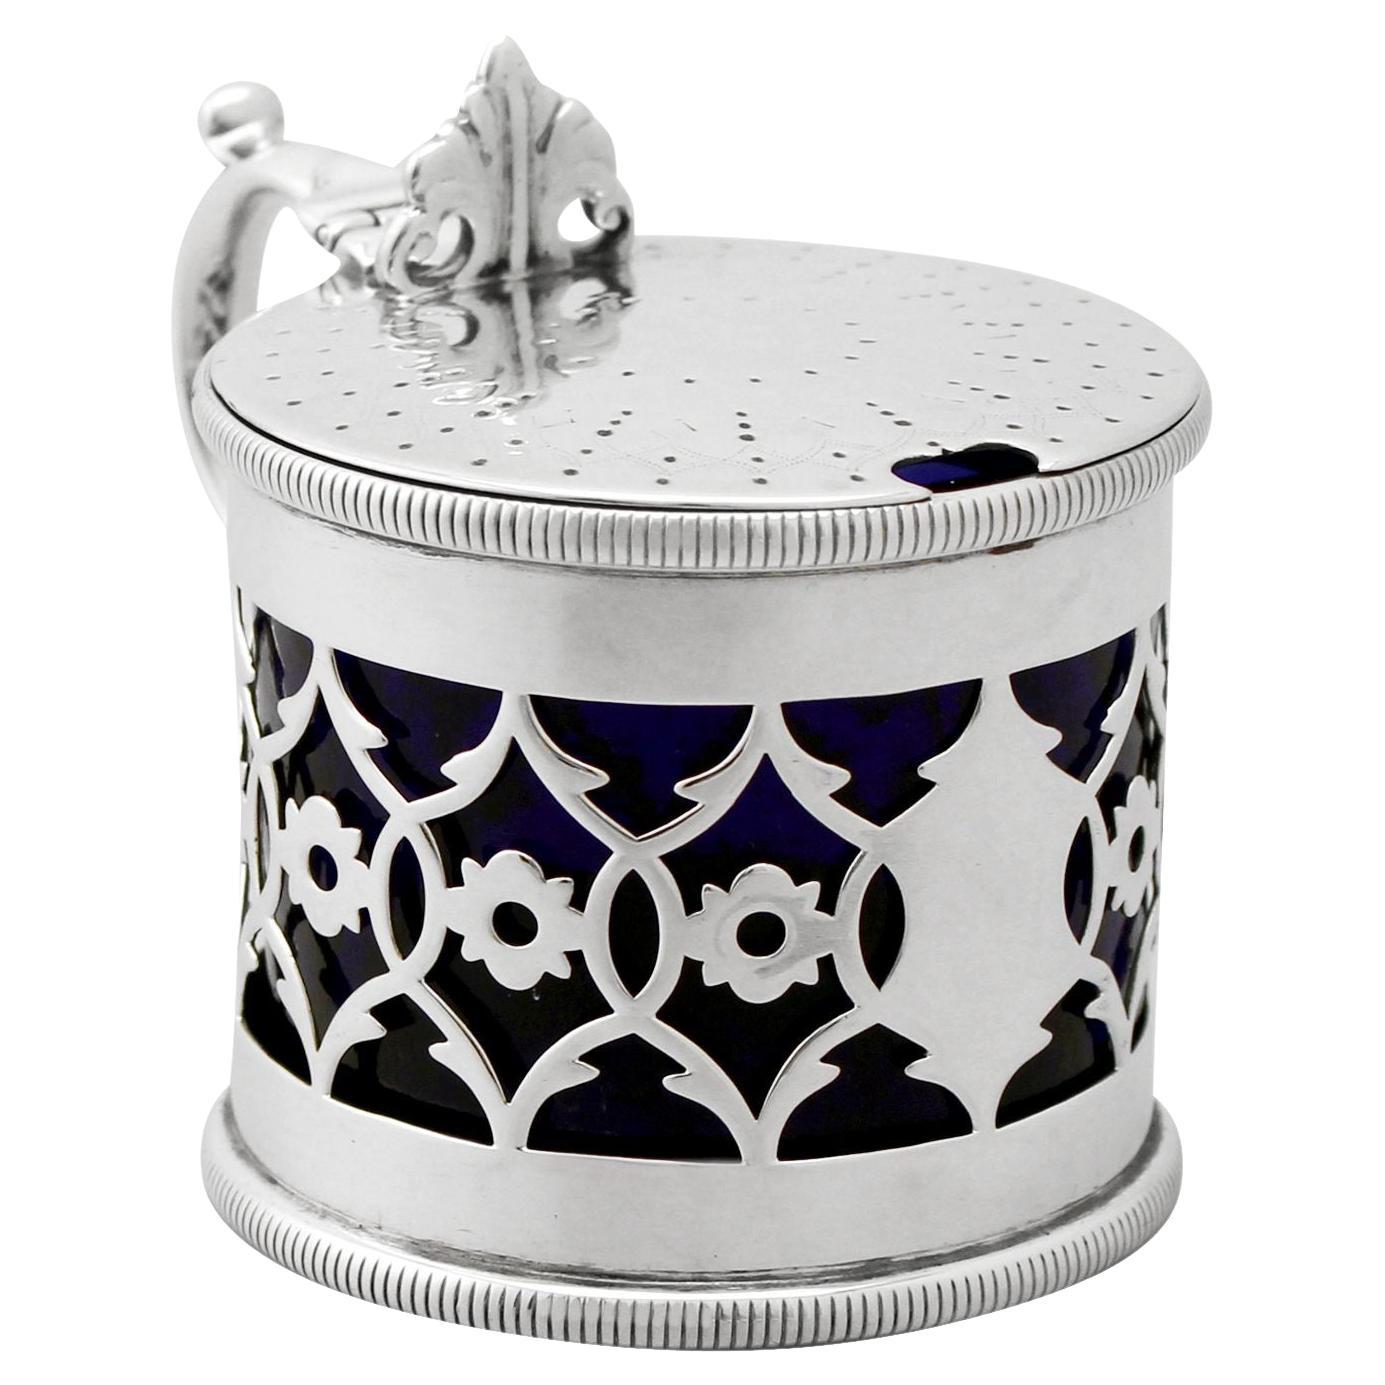 A fine and impressive antique Victorian English sterling silver mustard pot; an addition to our silver cruets/condiments collection.

This fine antique Victorian sterling silver mustard pot has a plain cylindrical form.

The body of the mustard